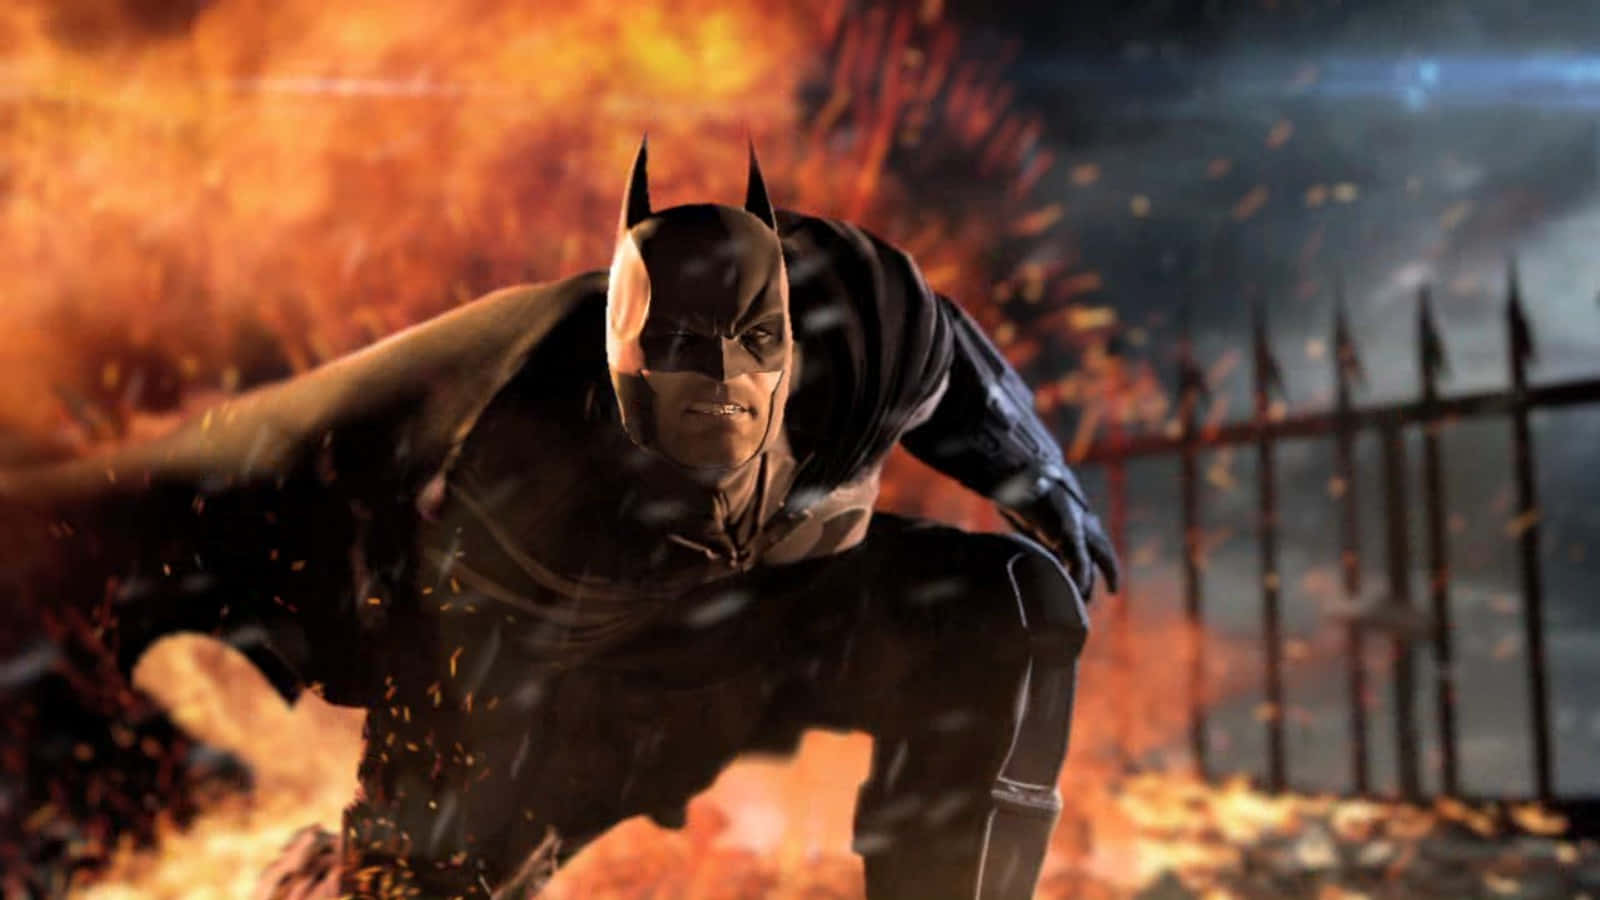 Get Ready To Face A New Breed Of Crime As The Dark Knight In Batman Arkham Origins Wallpaper